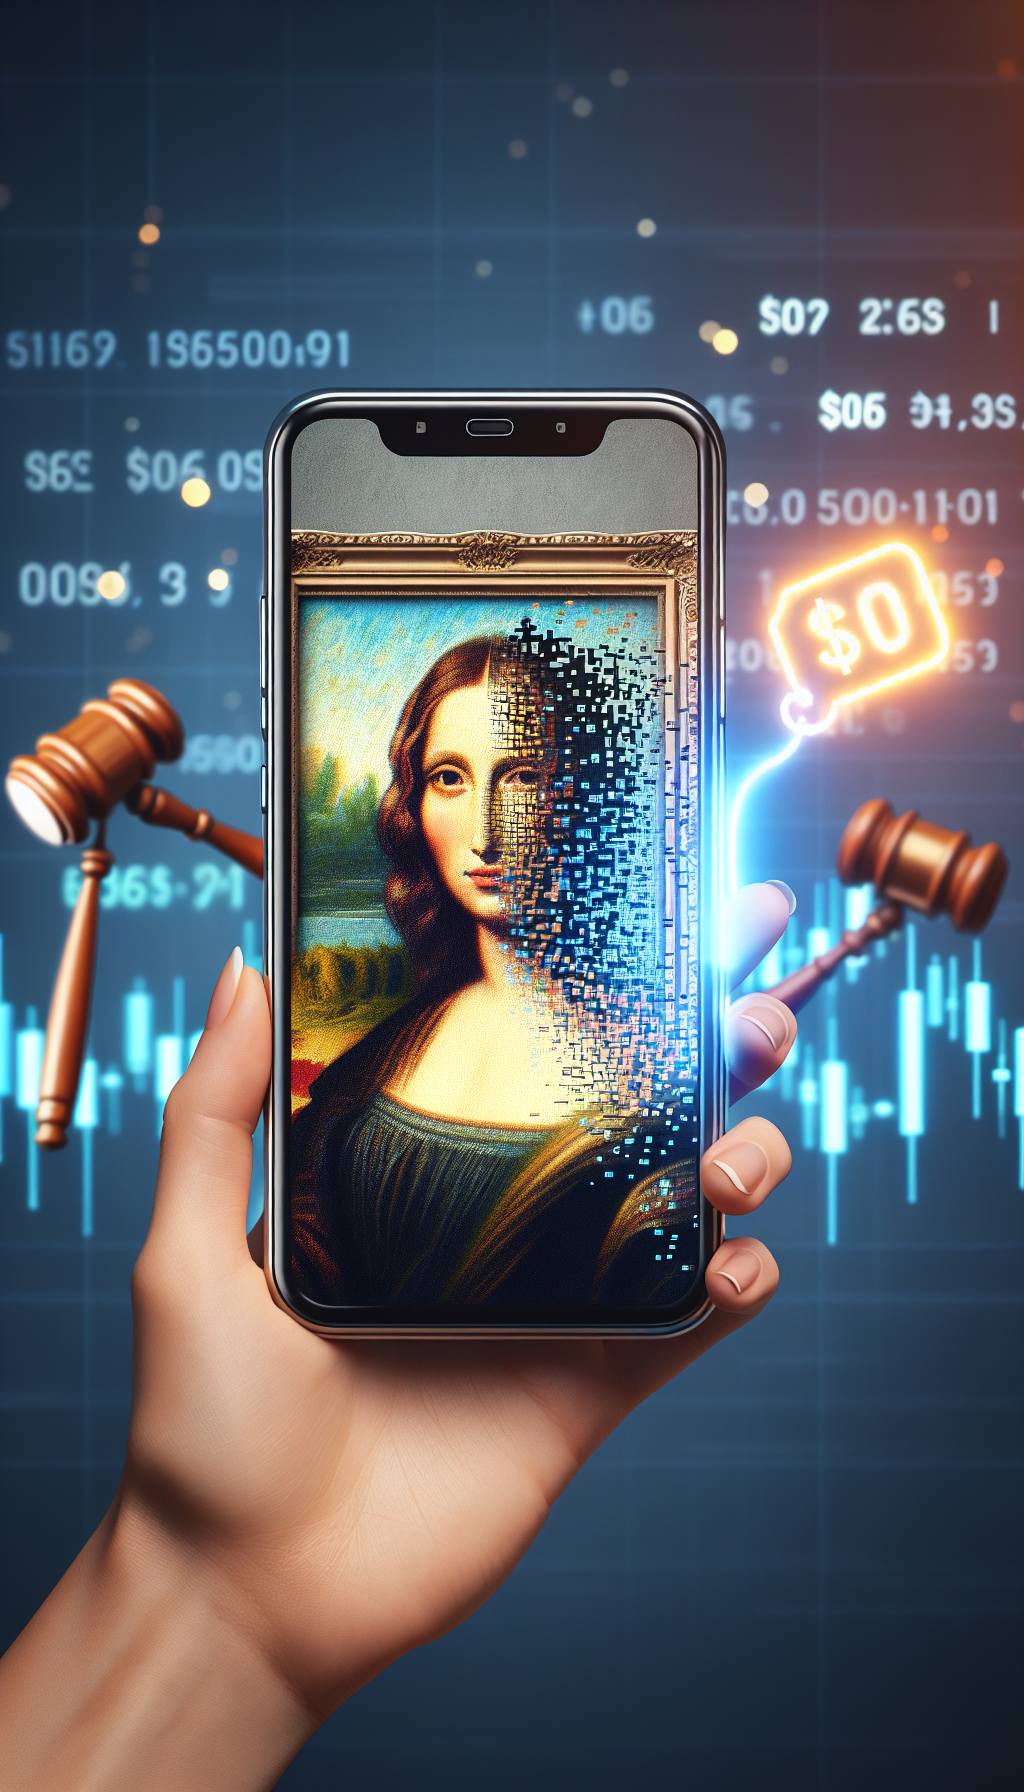 A sleek smartphone screen displays a classic painting, transitioned halfway across into pixelated digital art, with a bright, glowing tag marked ‘$0’ hanging off the frame. This encapsulates the merging of art and technology in valuation while emphasizing the free appraisal service. The background casts a soft bokeh of auction gavels and stock graphs, blending the art investment theme subtly.